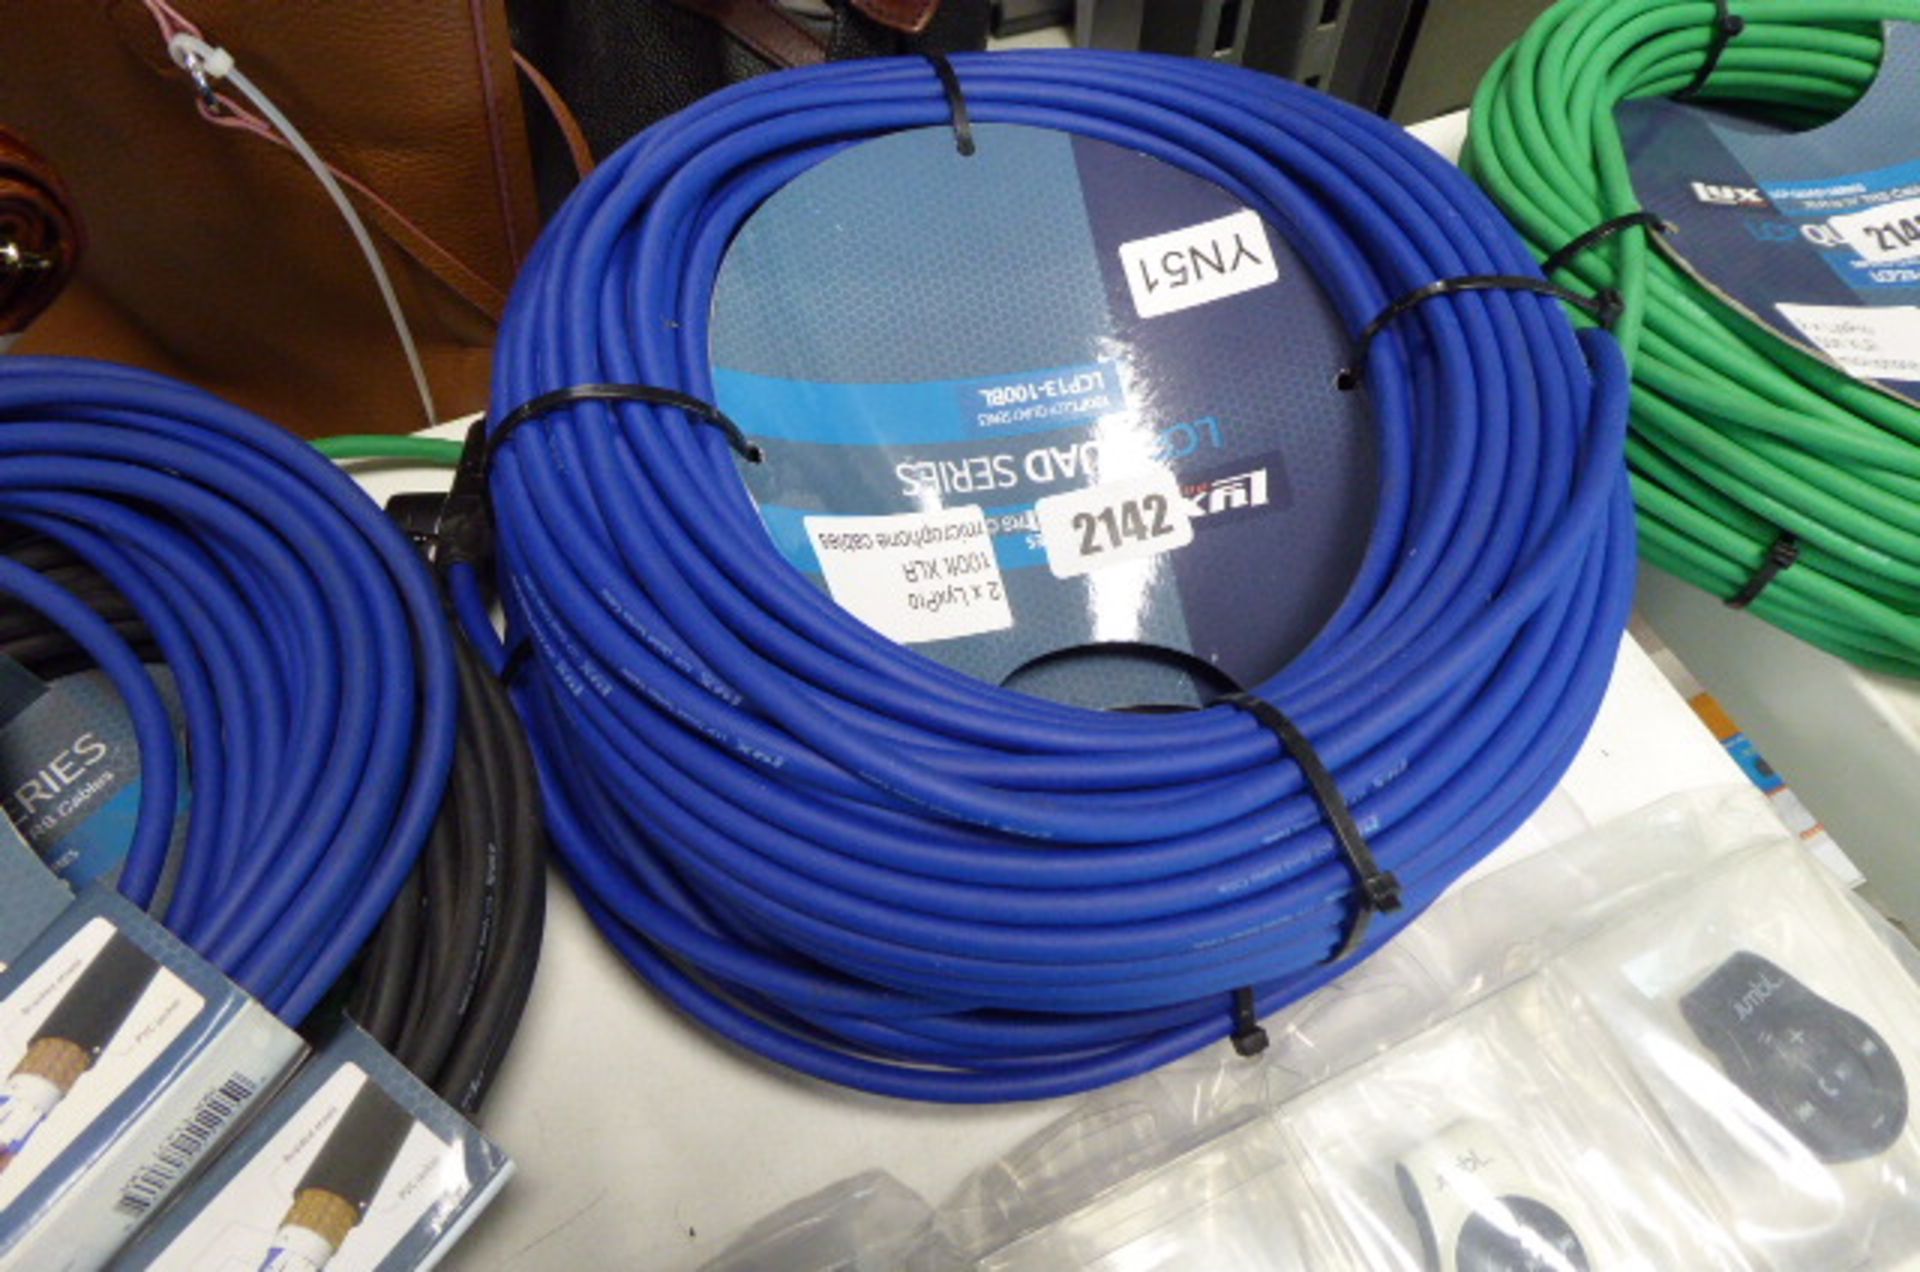 2 Lyx pro 100ft microphone cables